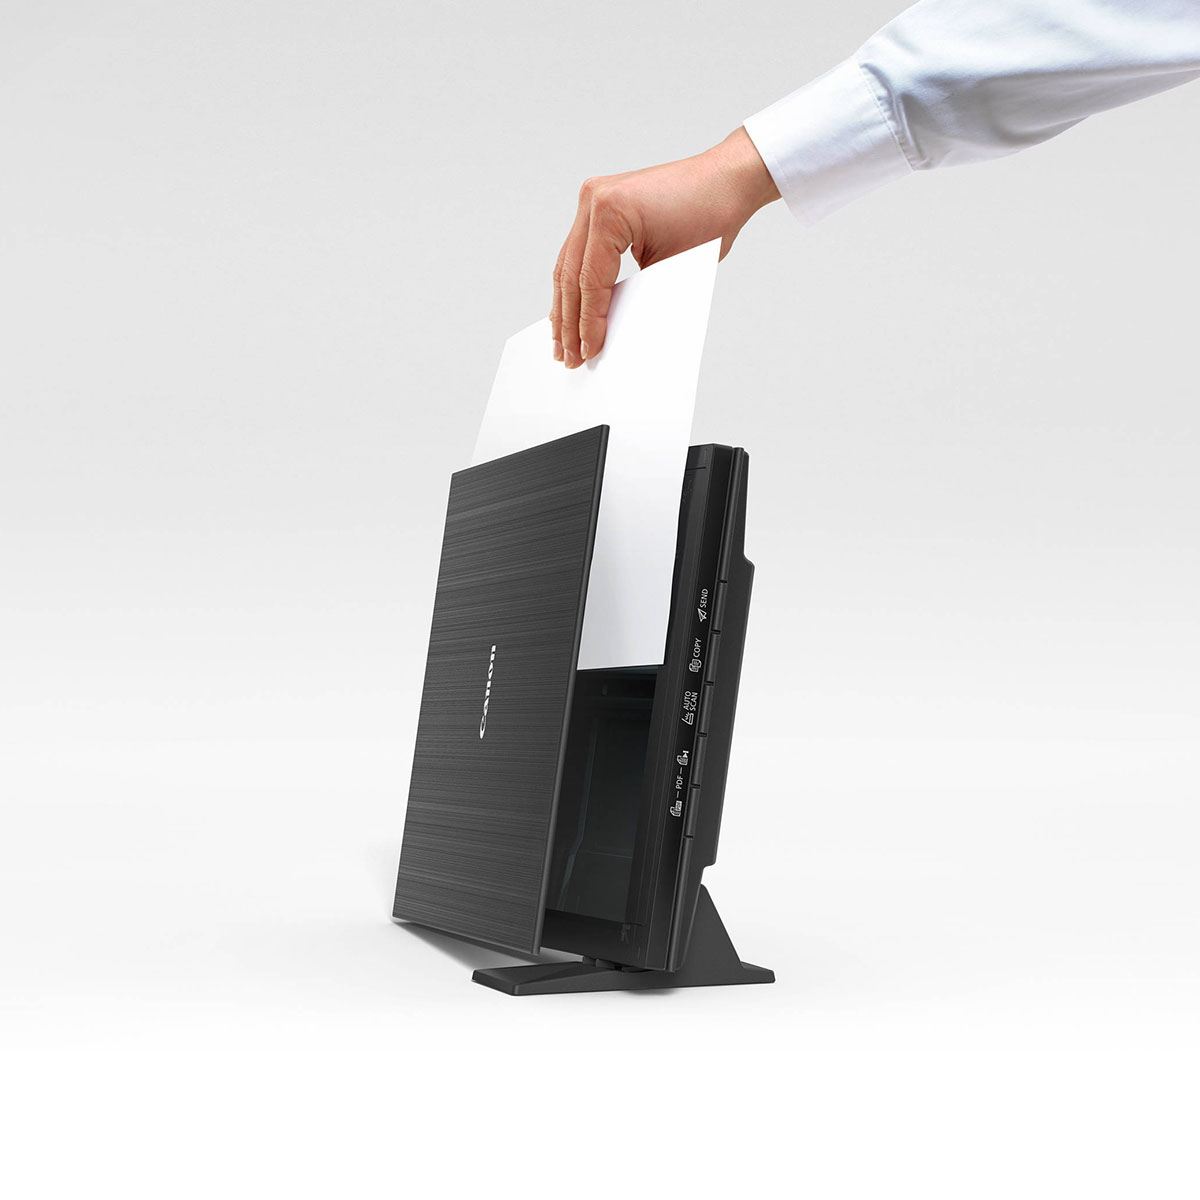 CanoScan Flatbed Scanners - Scanners for Home & Office - Canon